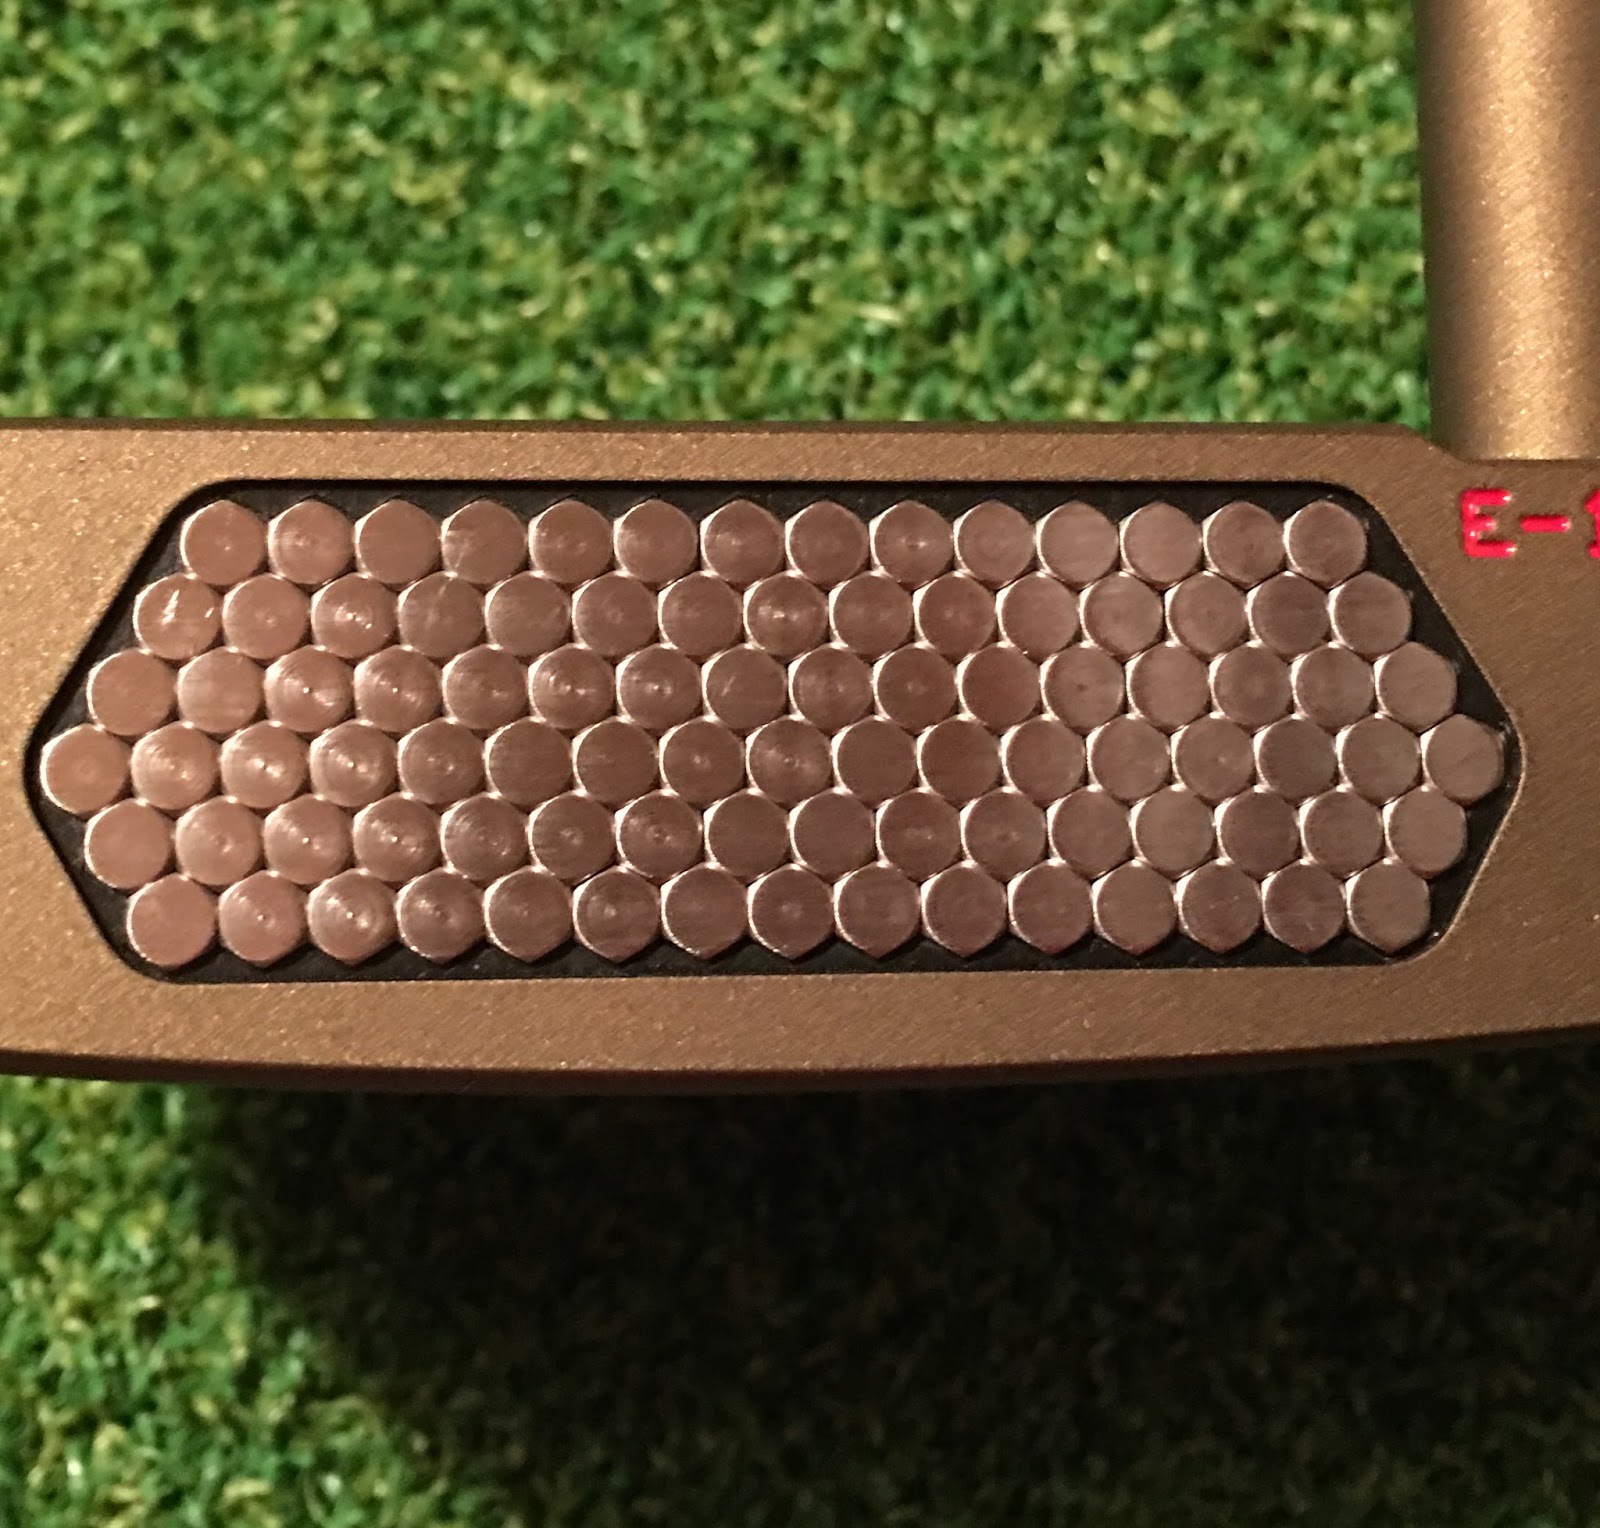 The #1 Writer in Golf: EDEL Golf Torque Balanced Putter Review